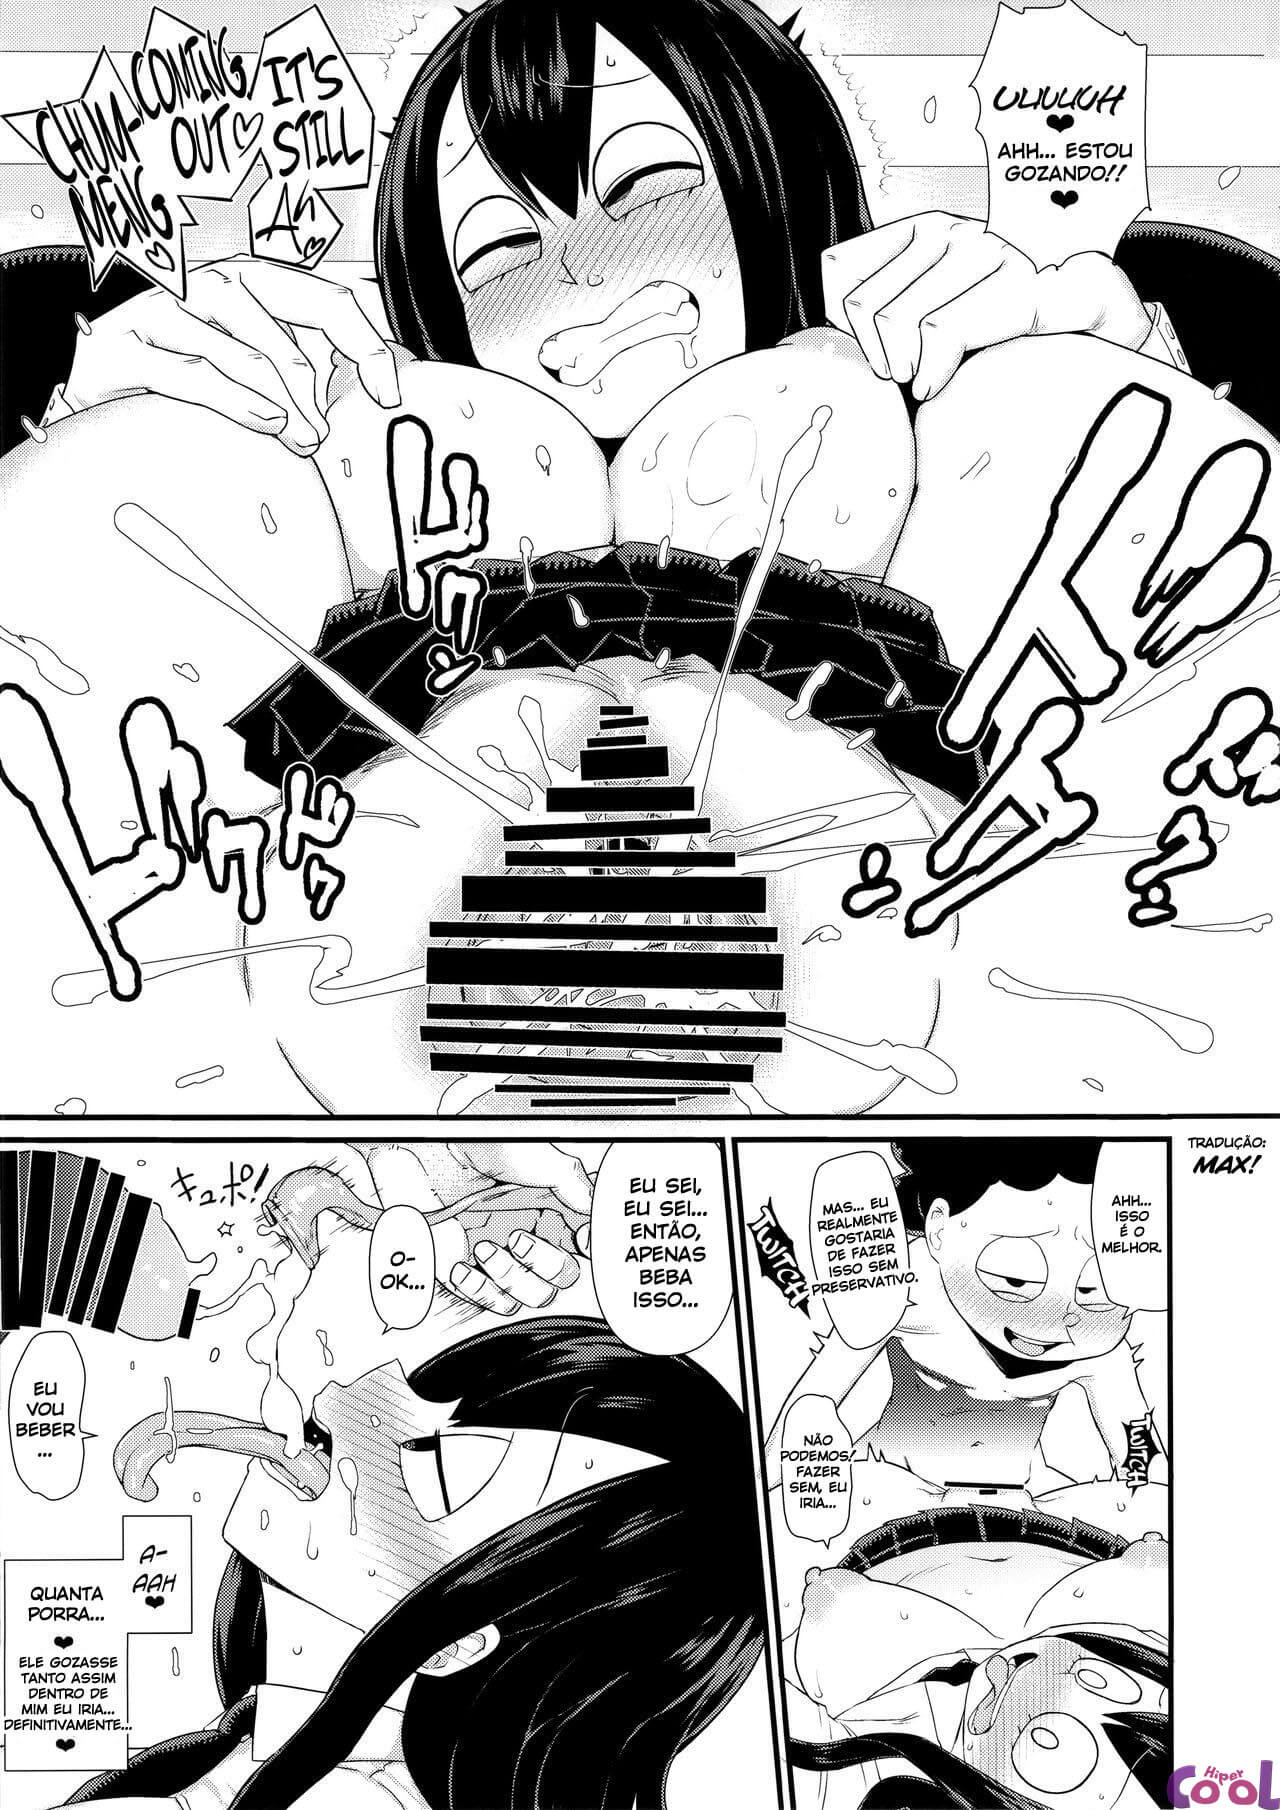 froppy-chapter-01-page-21.jpg